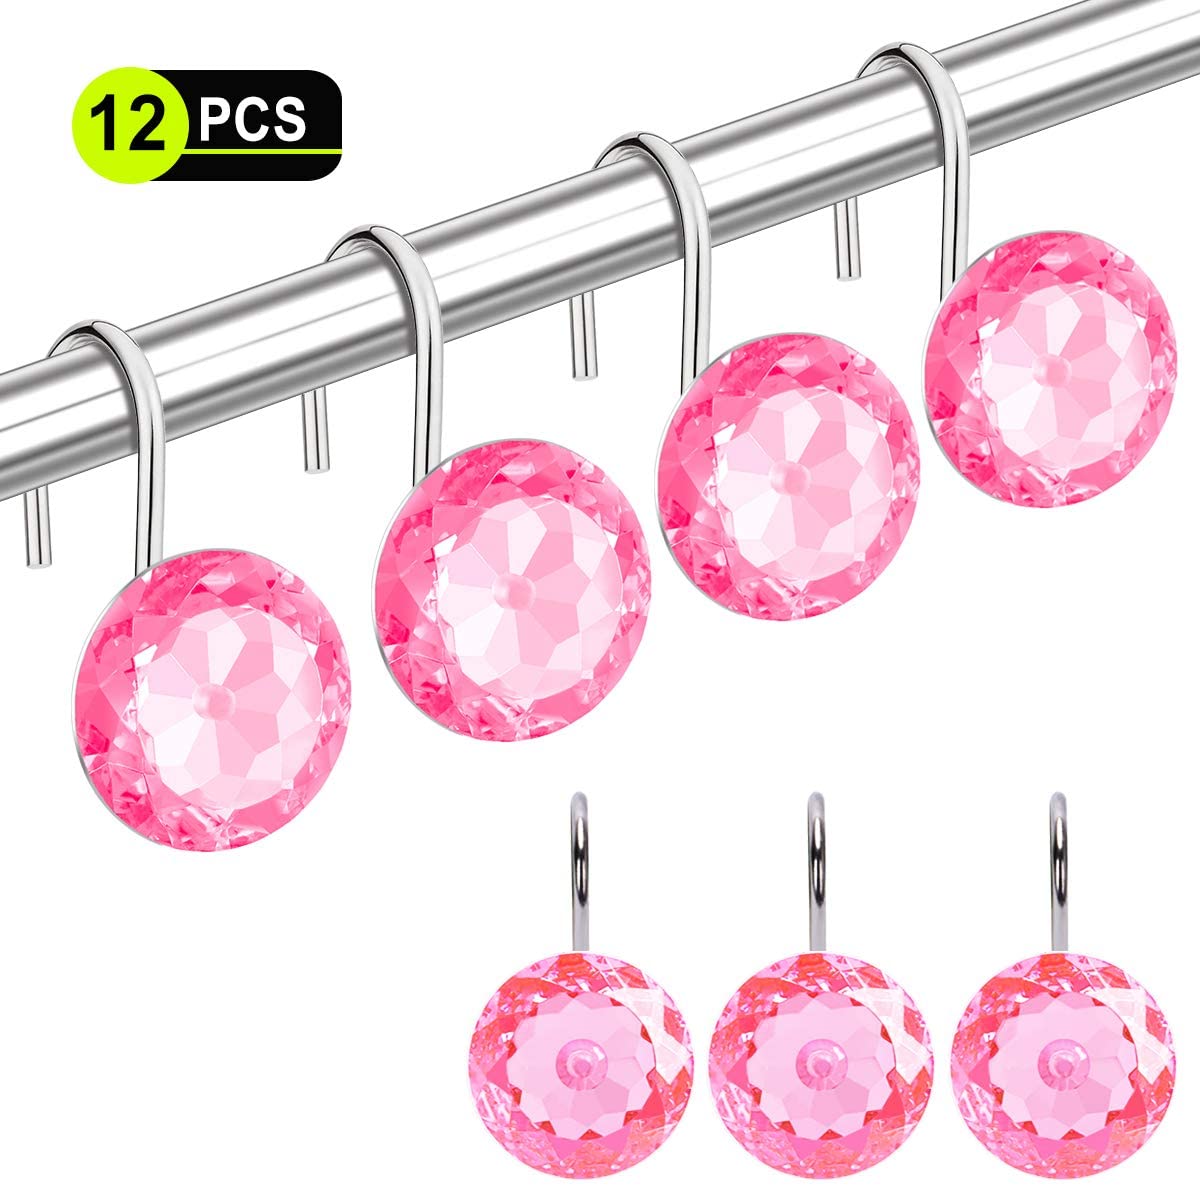 Decorative Resin Shower Details about   Yapicoco 12PCS Shower Curtain Hooks Rings for Bathroom 